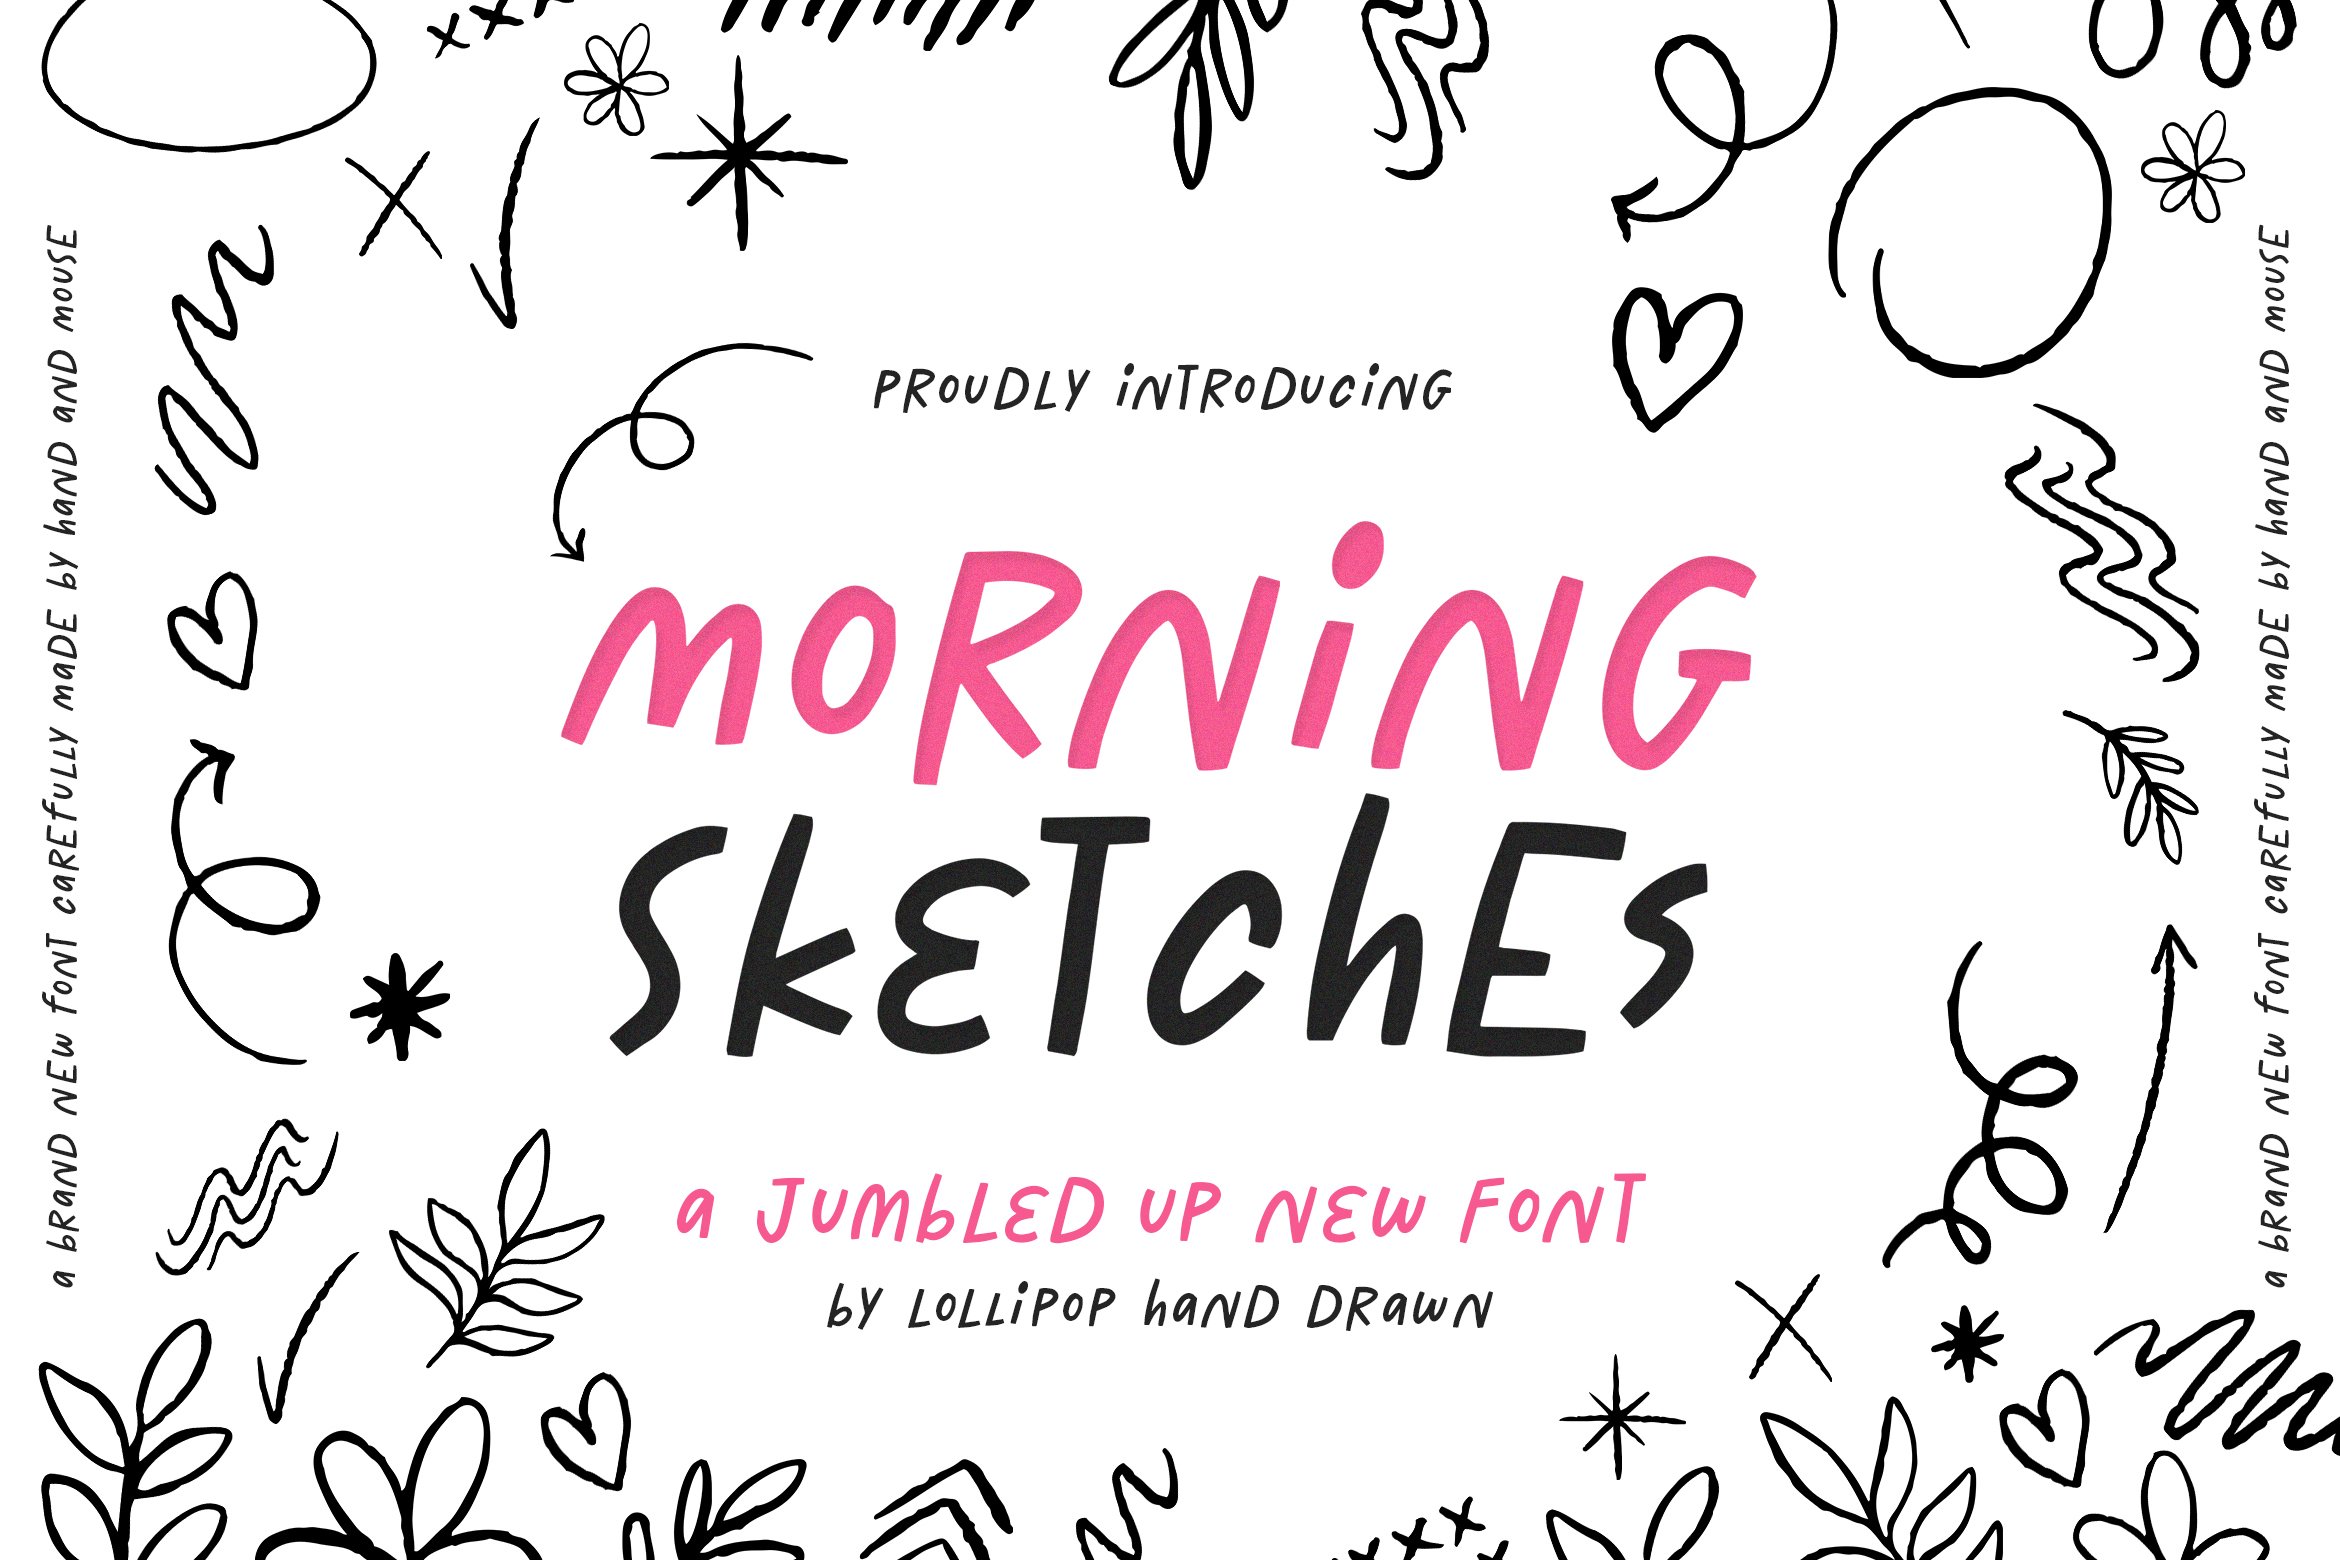 Morning Sketches Font cover image.